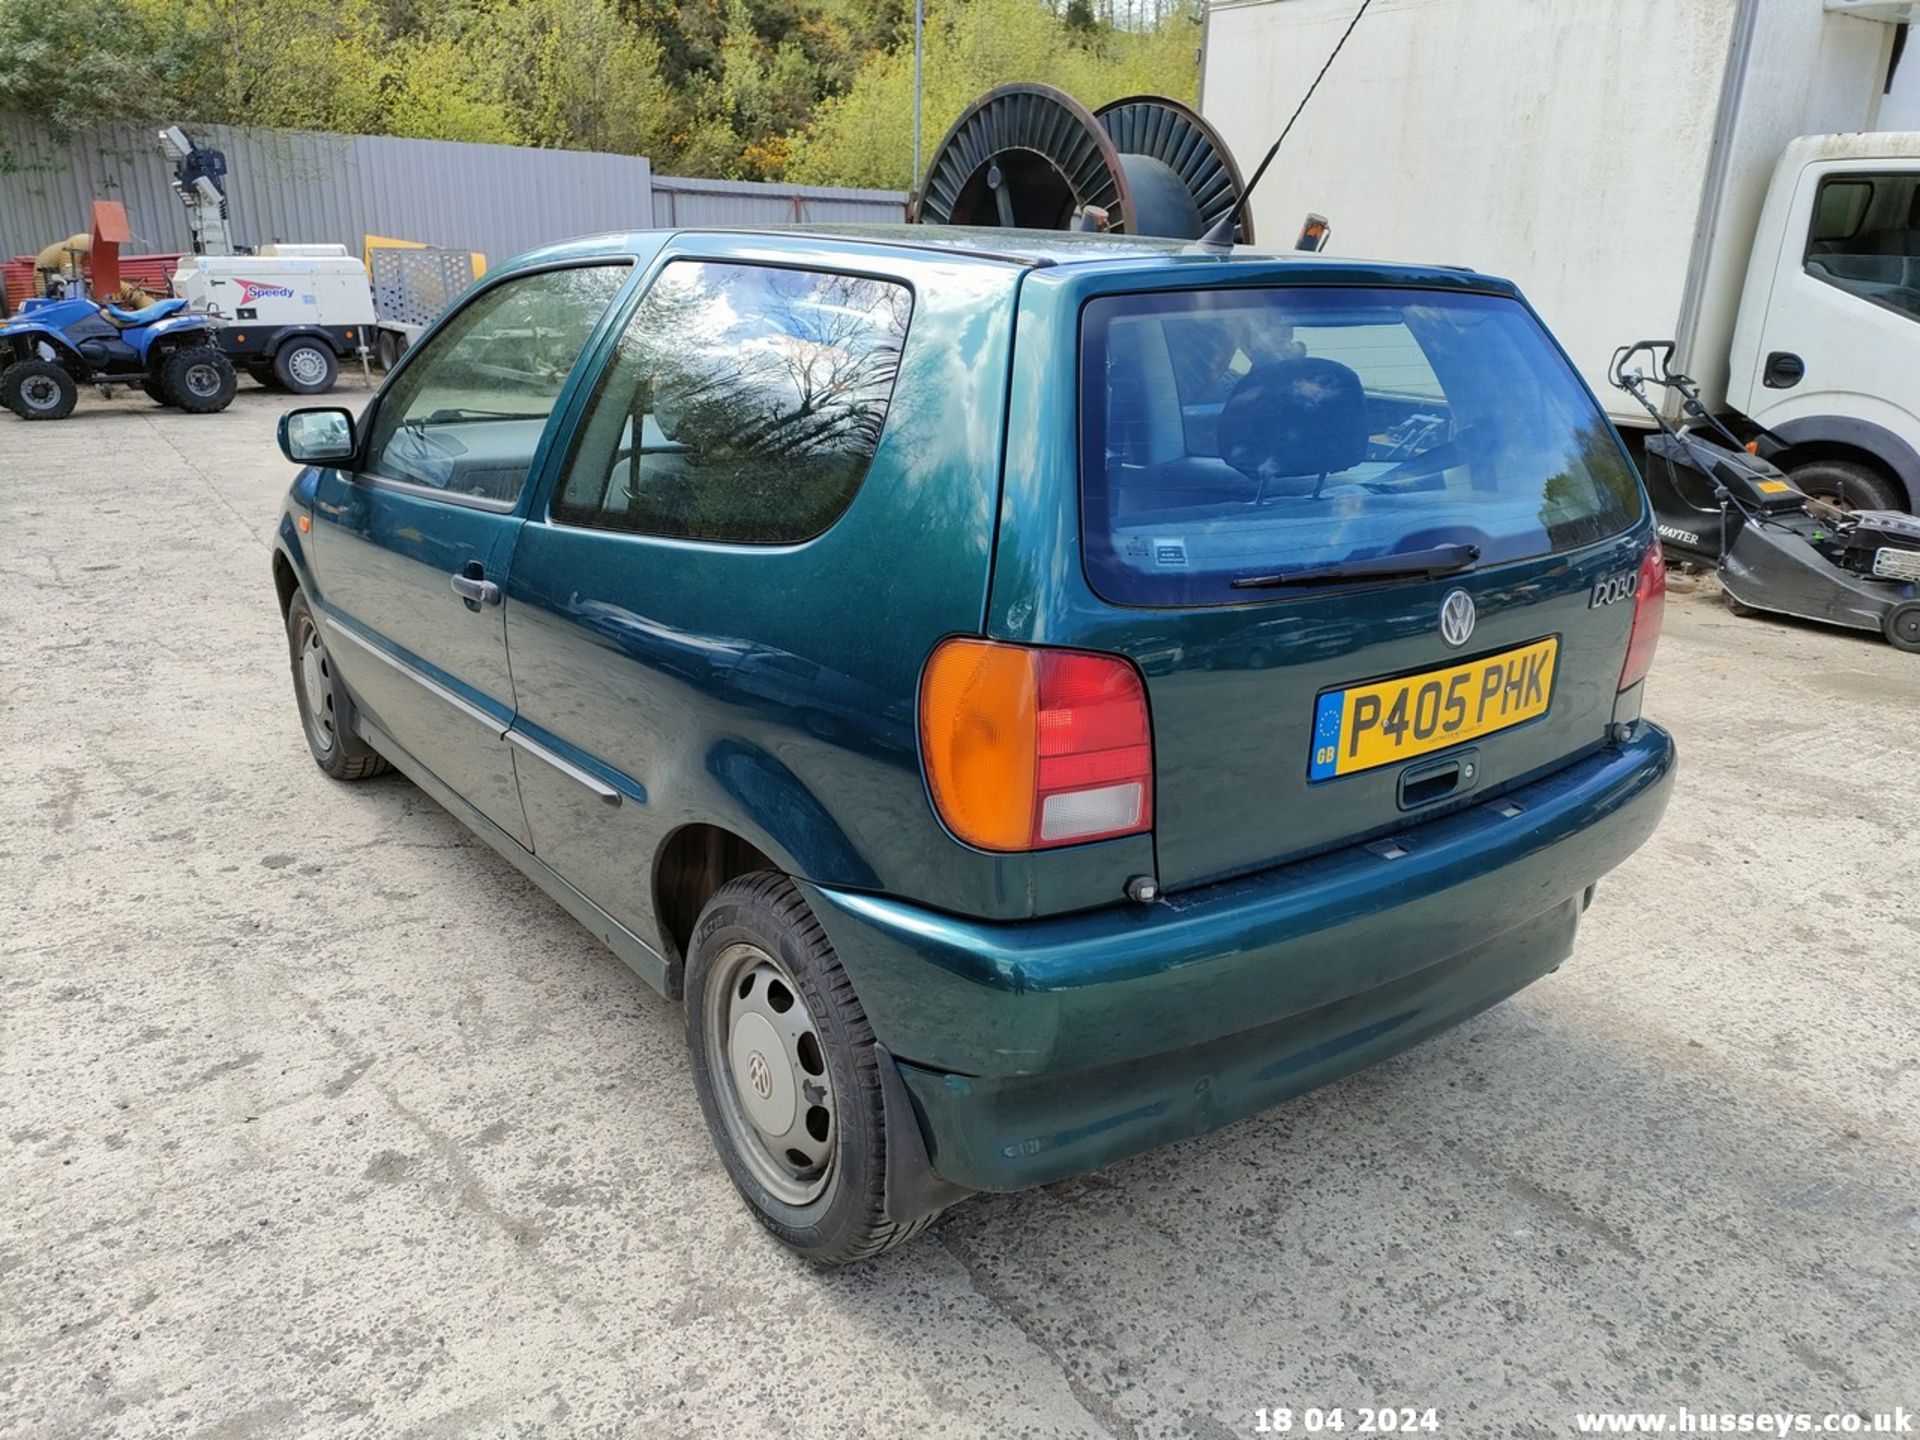 1997 VOLKSWAGEN POLO 1.4 CL AUTO - 1390cc 3dr Hatchback (Green, 68k) - Image 20 of 60